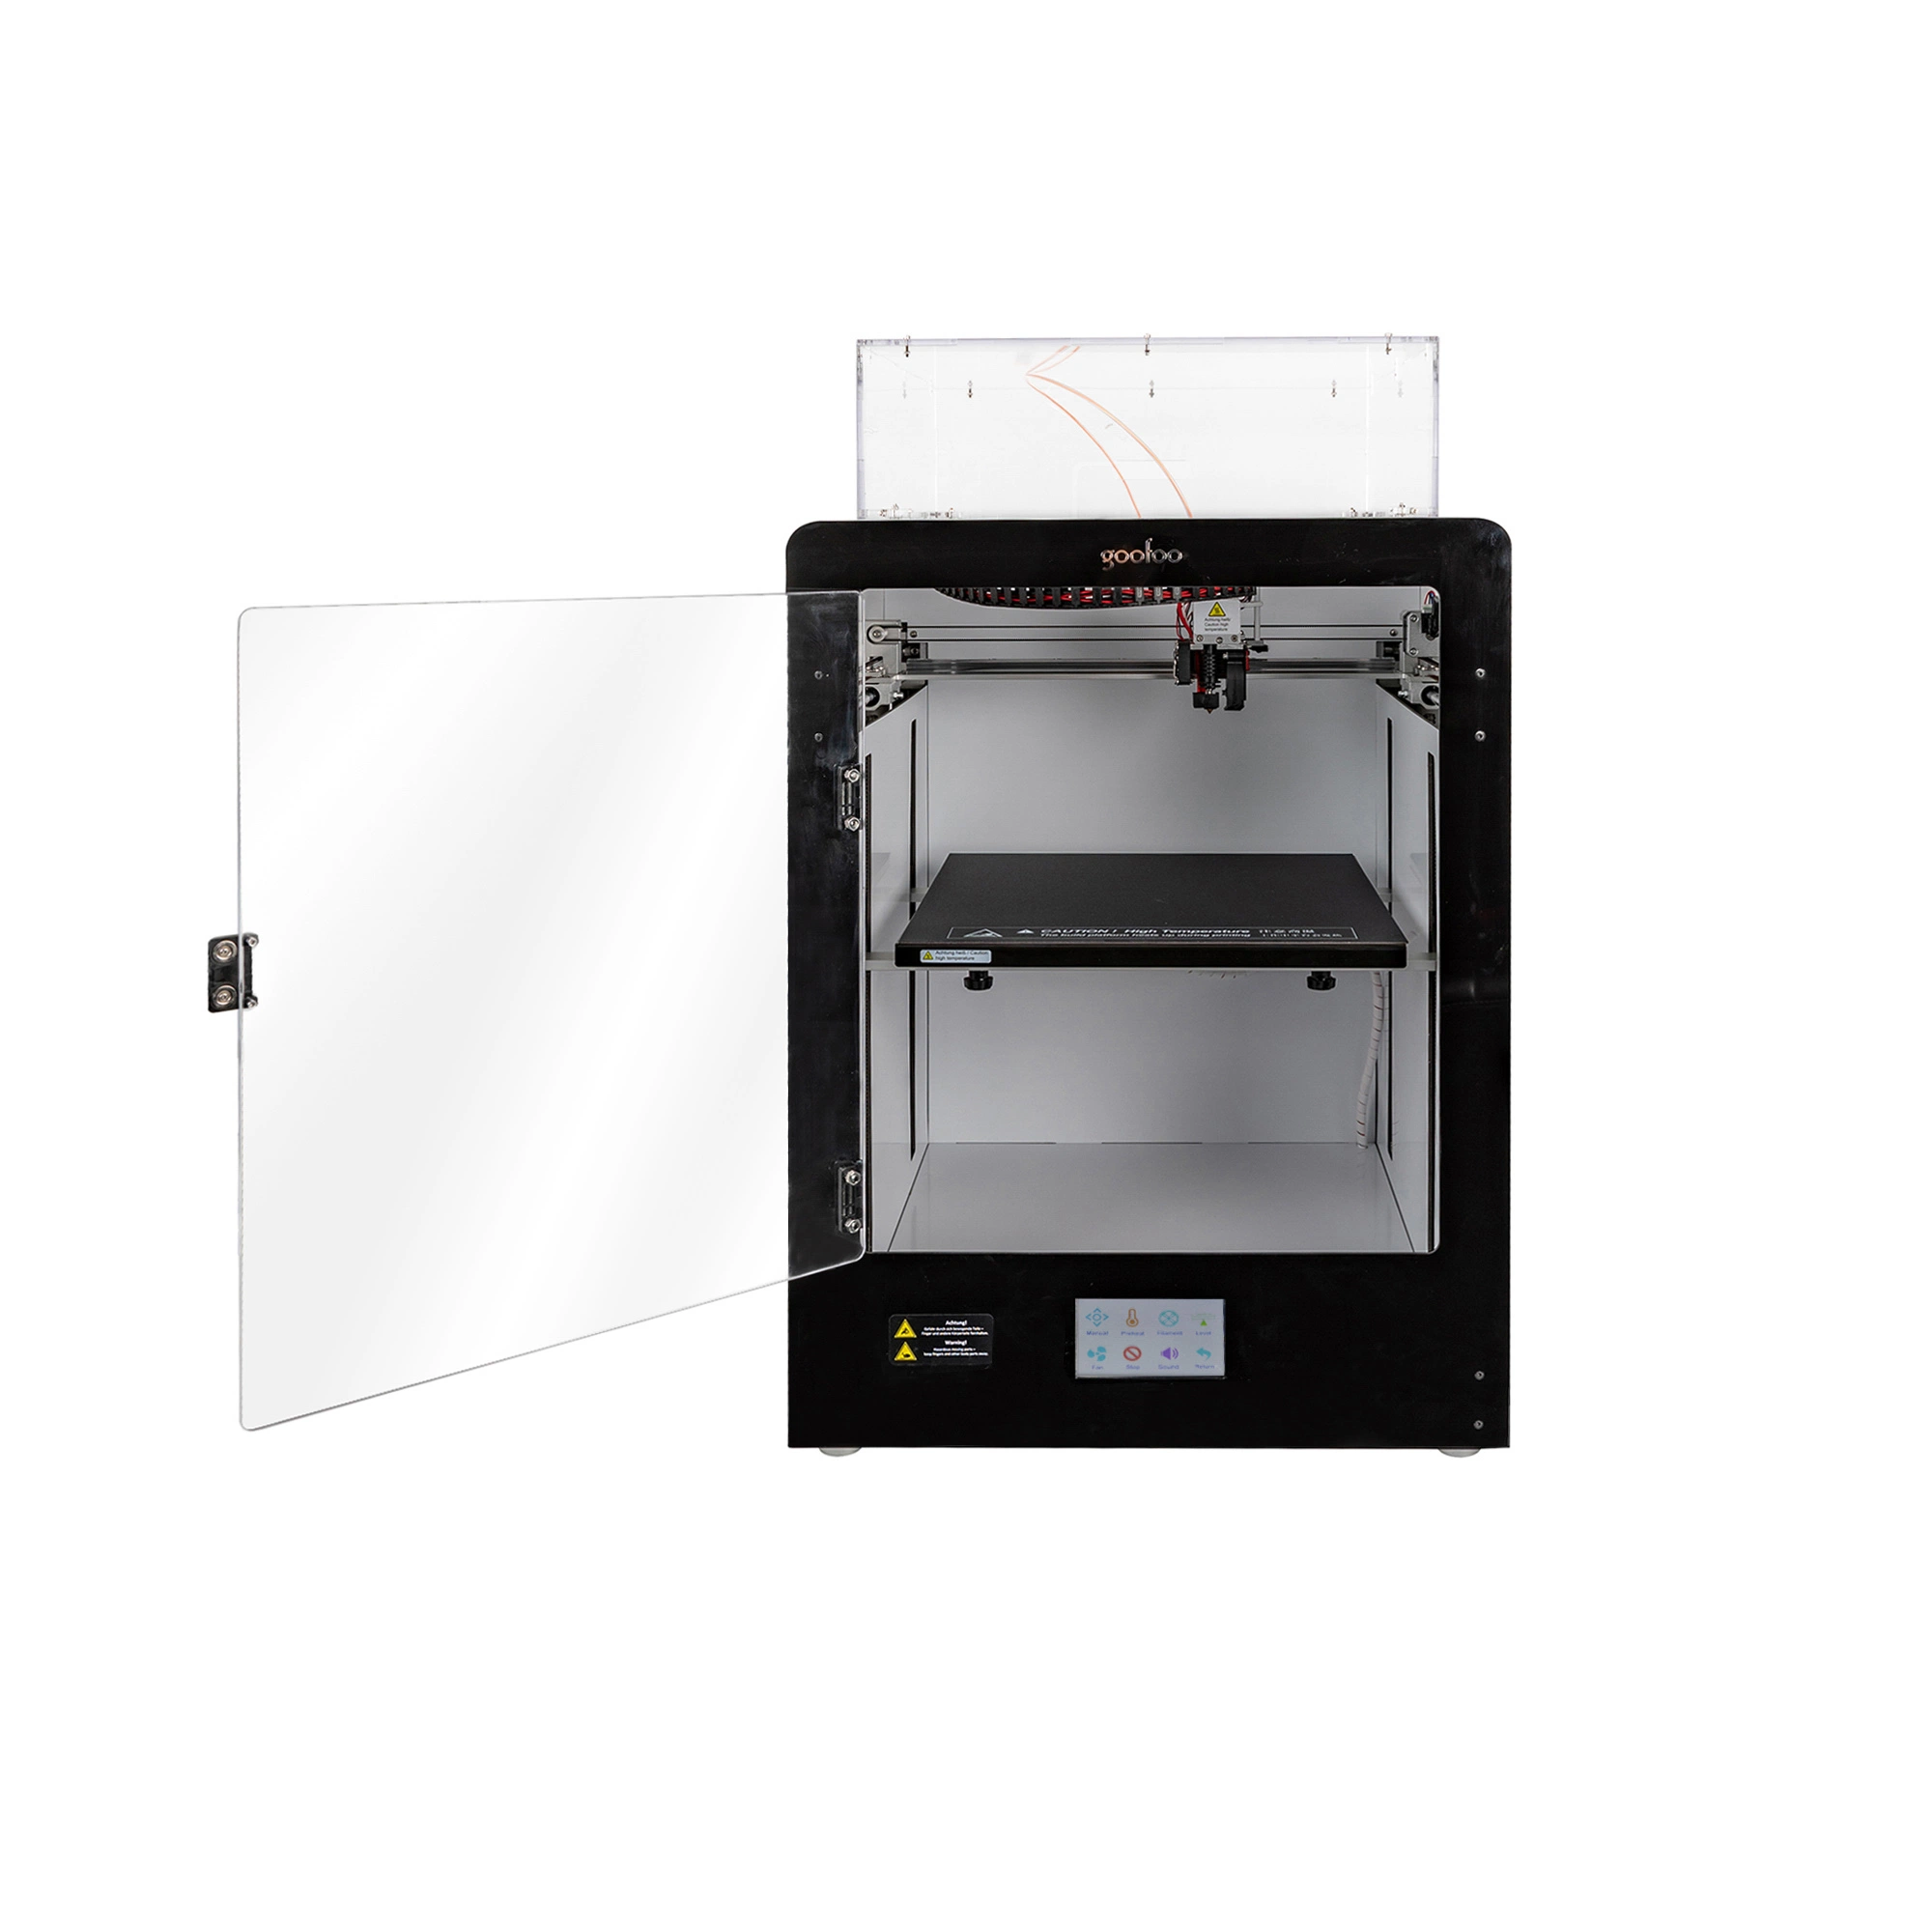 Industry Professional Larger Build Volume 380*380*400 mm Fdm 3D Printer to Print with 1.75mm 3D Filament of PLA, ABS, Nylon, Carbon Fiber